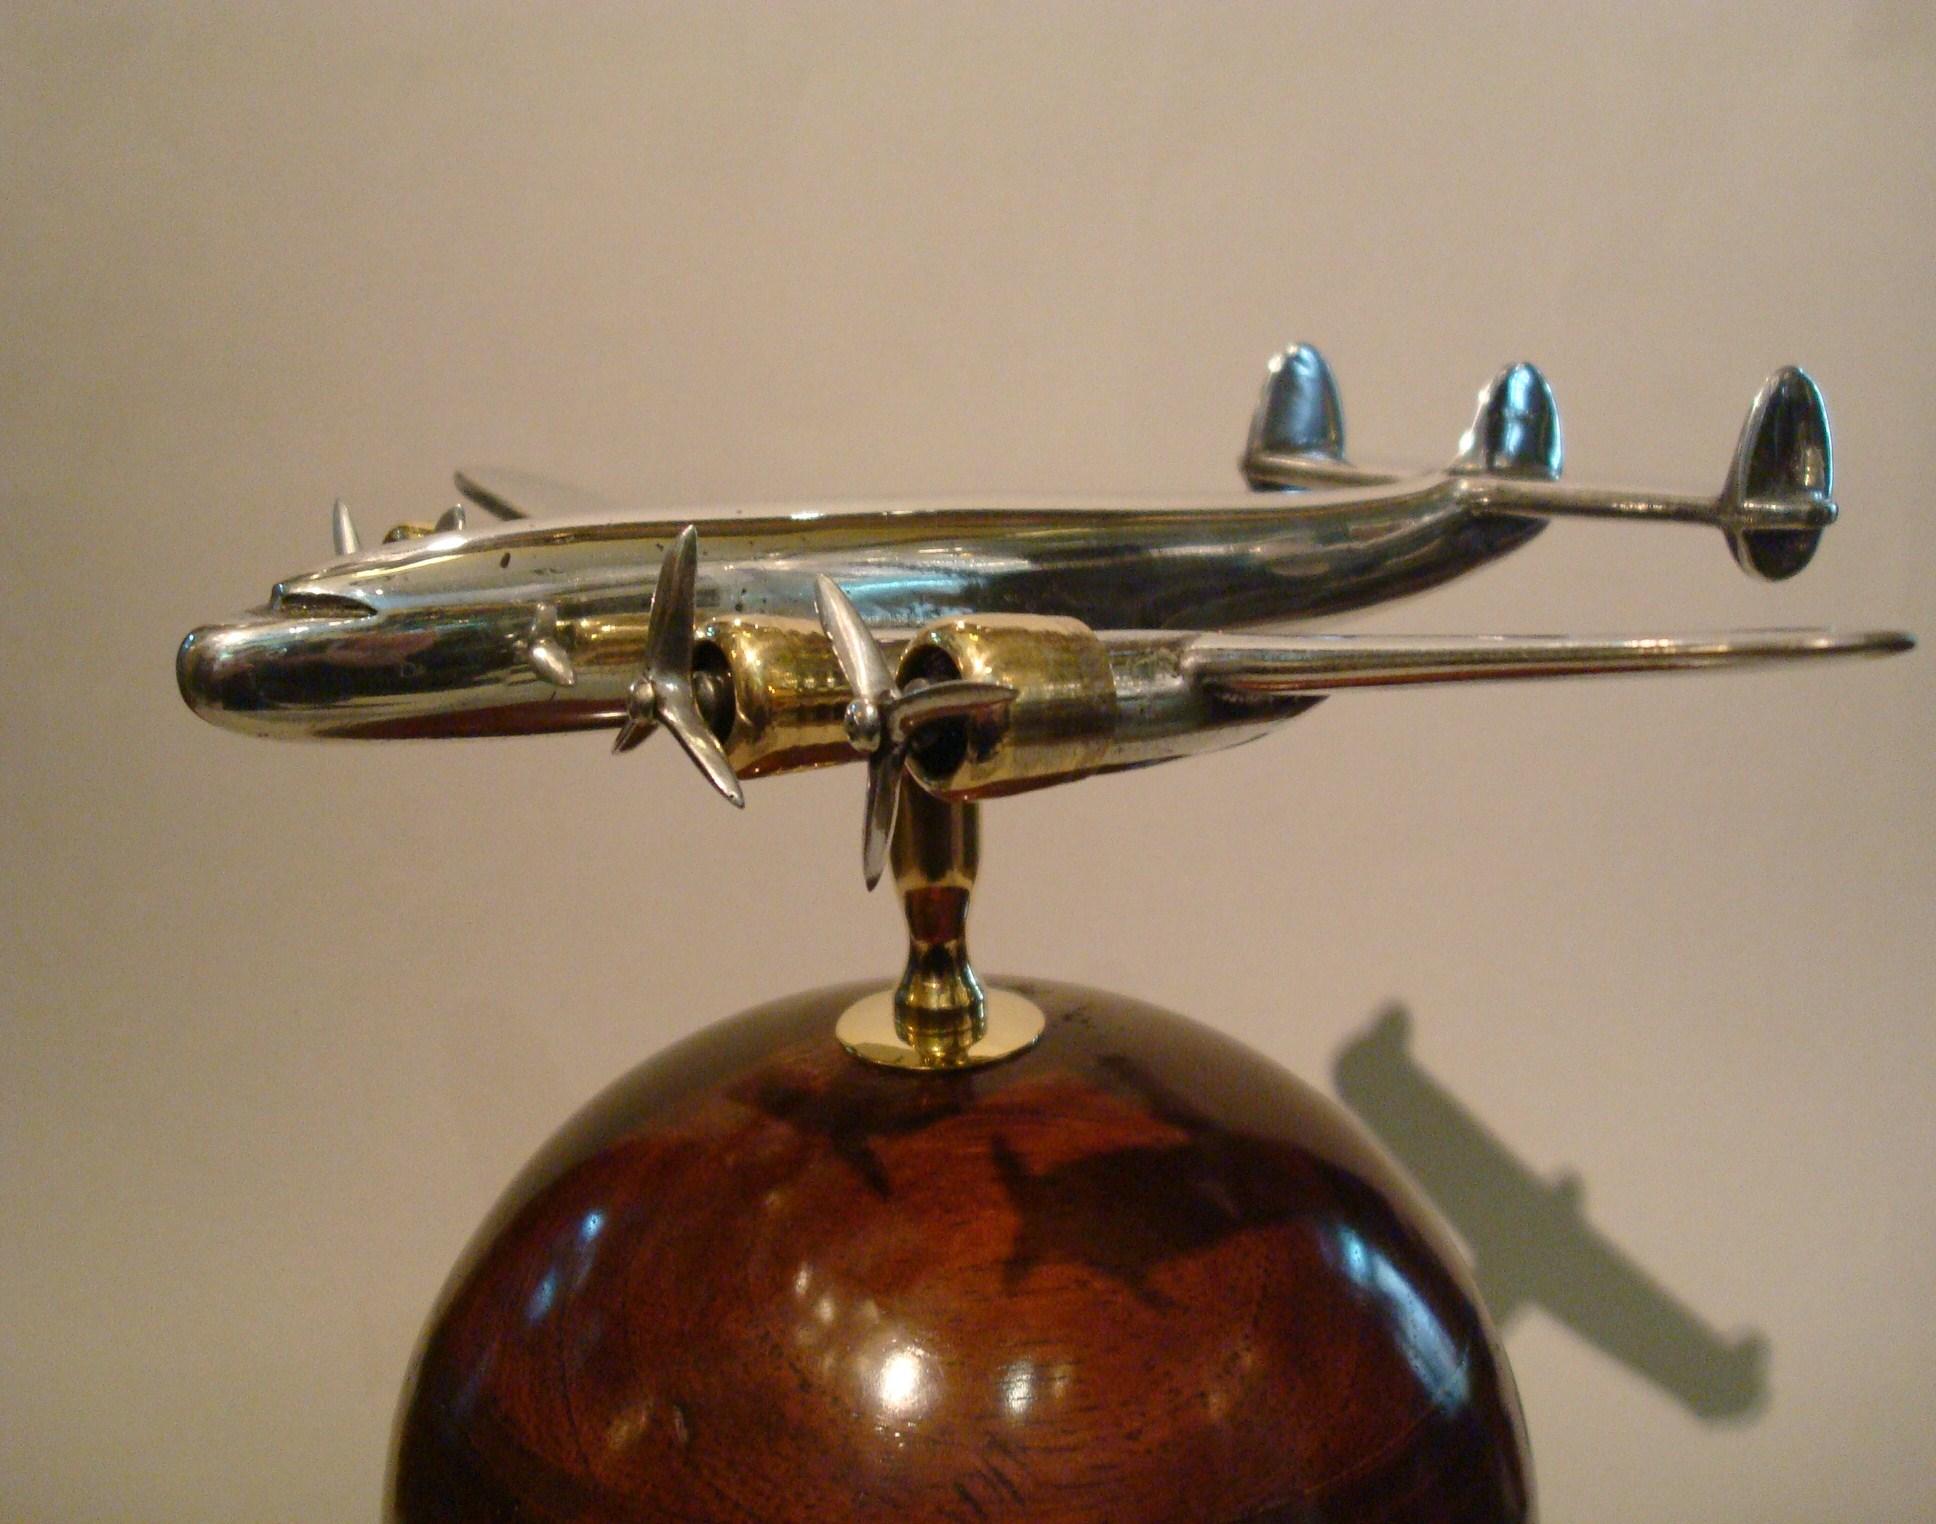 Aviation Lockheed Constellation vintage aluminium desk top display airplane model. The model has movement, you can change the position of the airplane. It has a mixture of Art Deco and midcentury design.
The Lockheed Constellation (